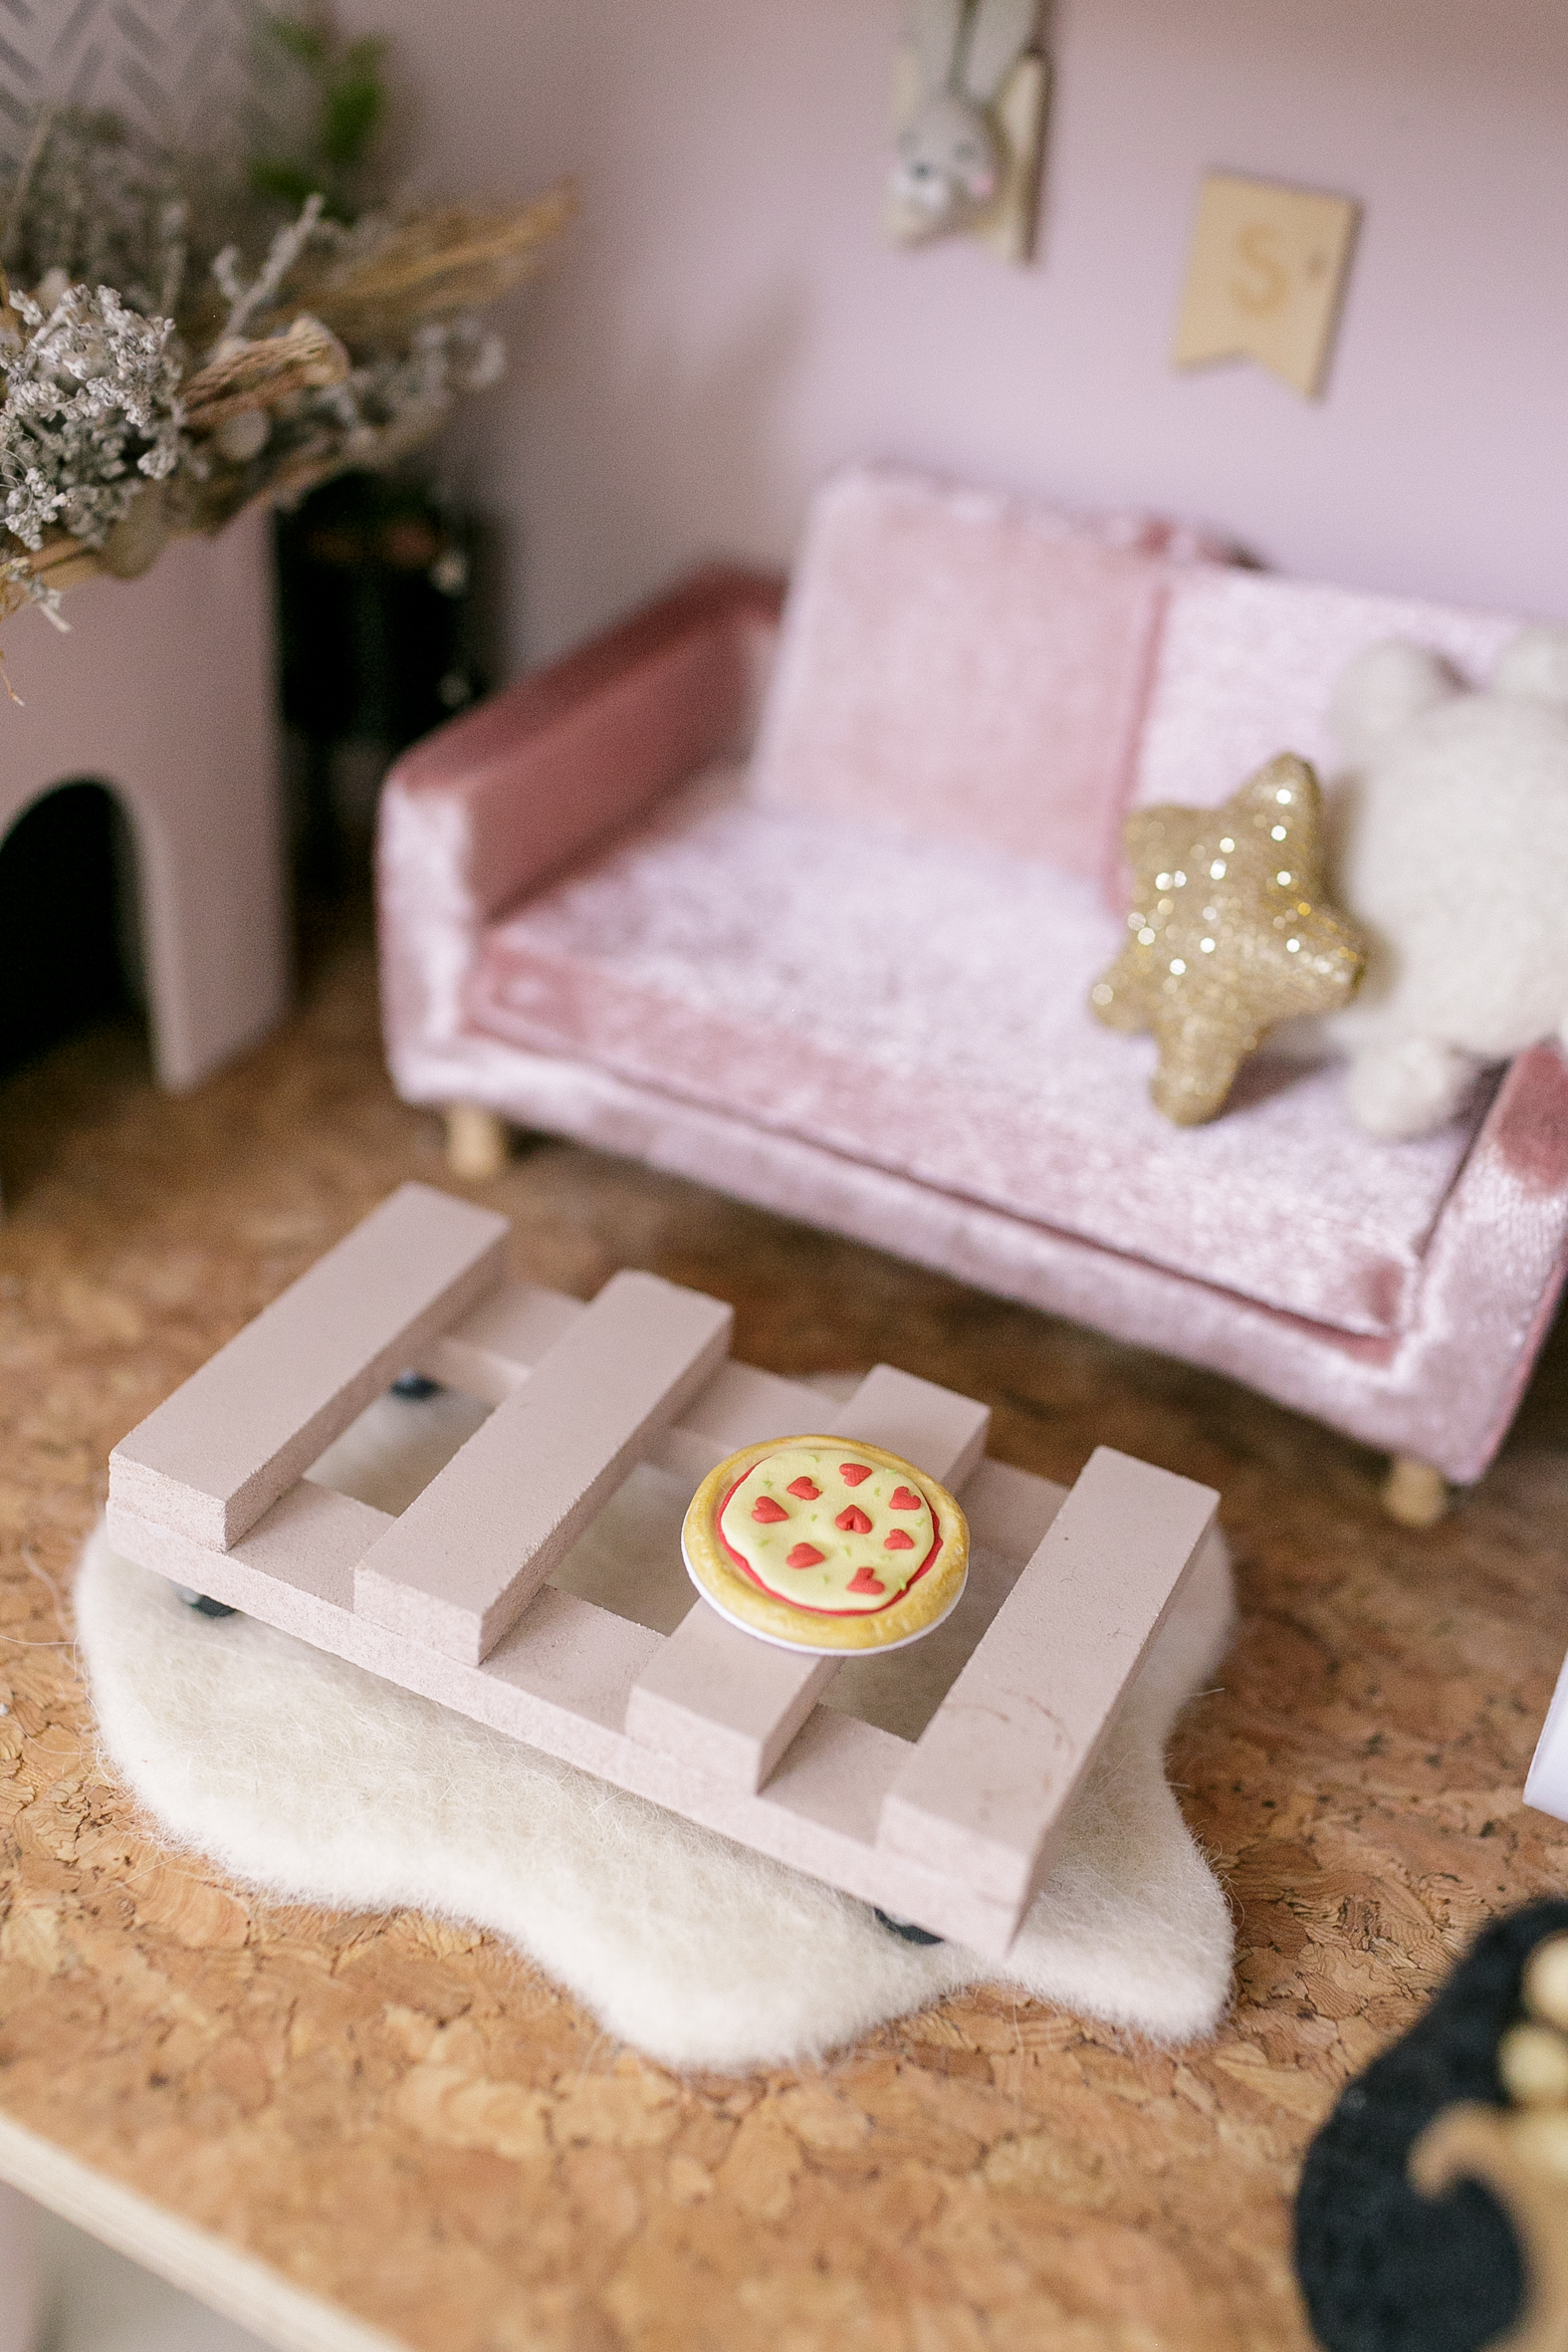 Limited edition hearty dollhouse pizza